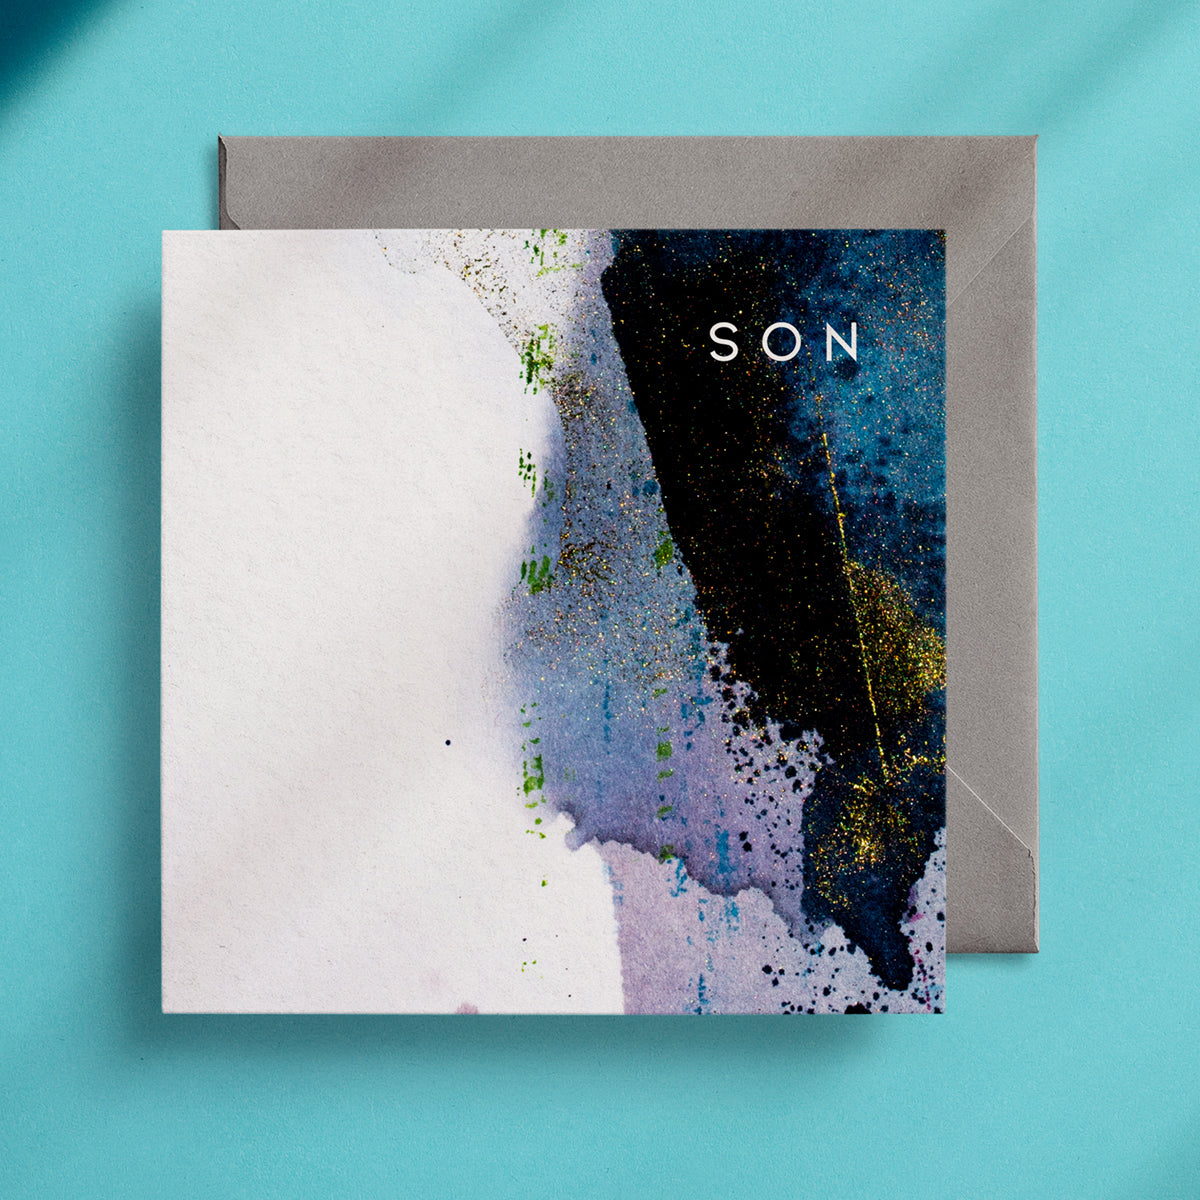 Son - ABSTRACT Greeting Card